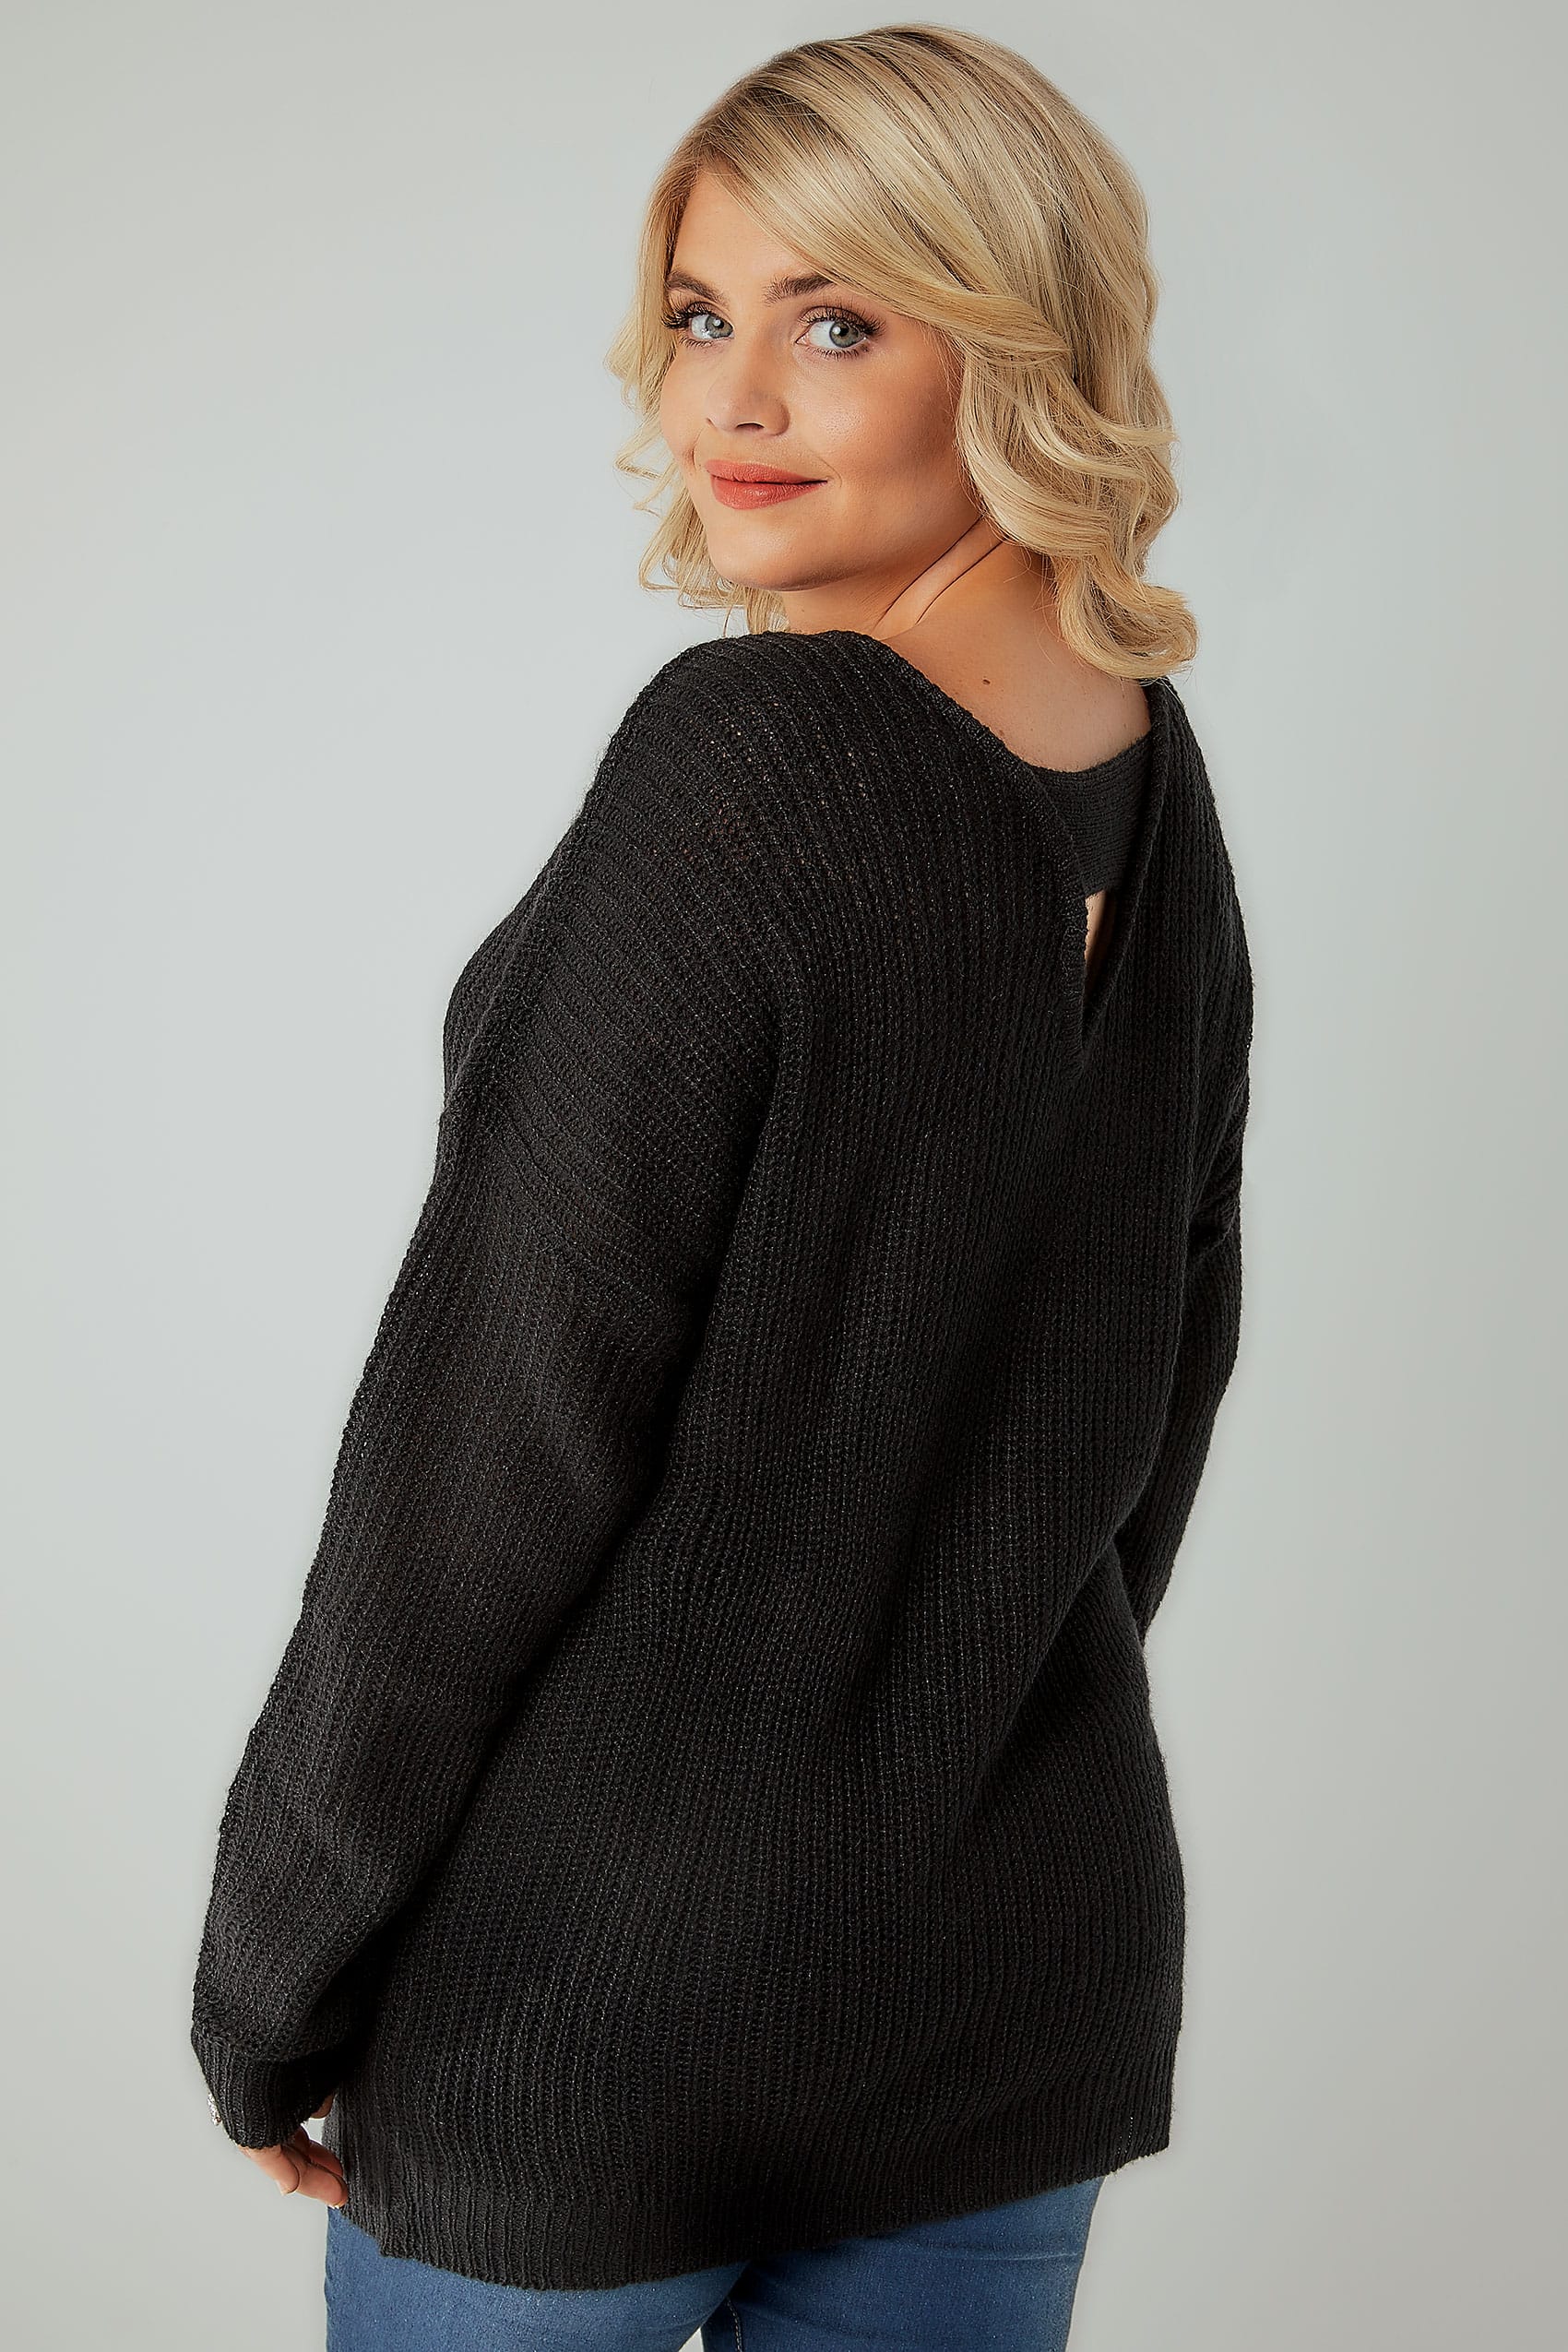 Black knitted Longline Jumper With Open Back, Plus size 16 to 36